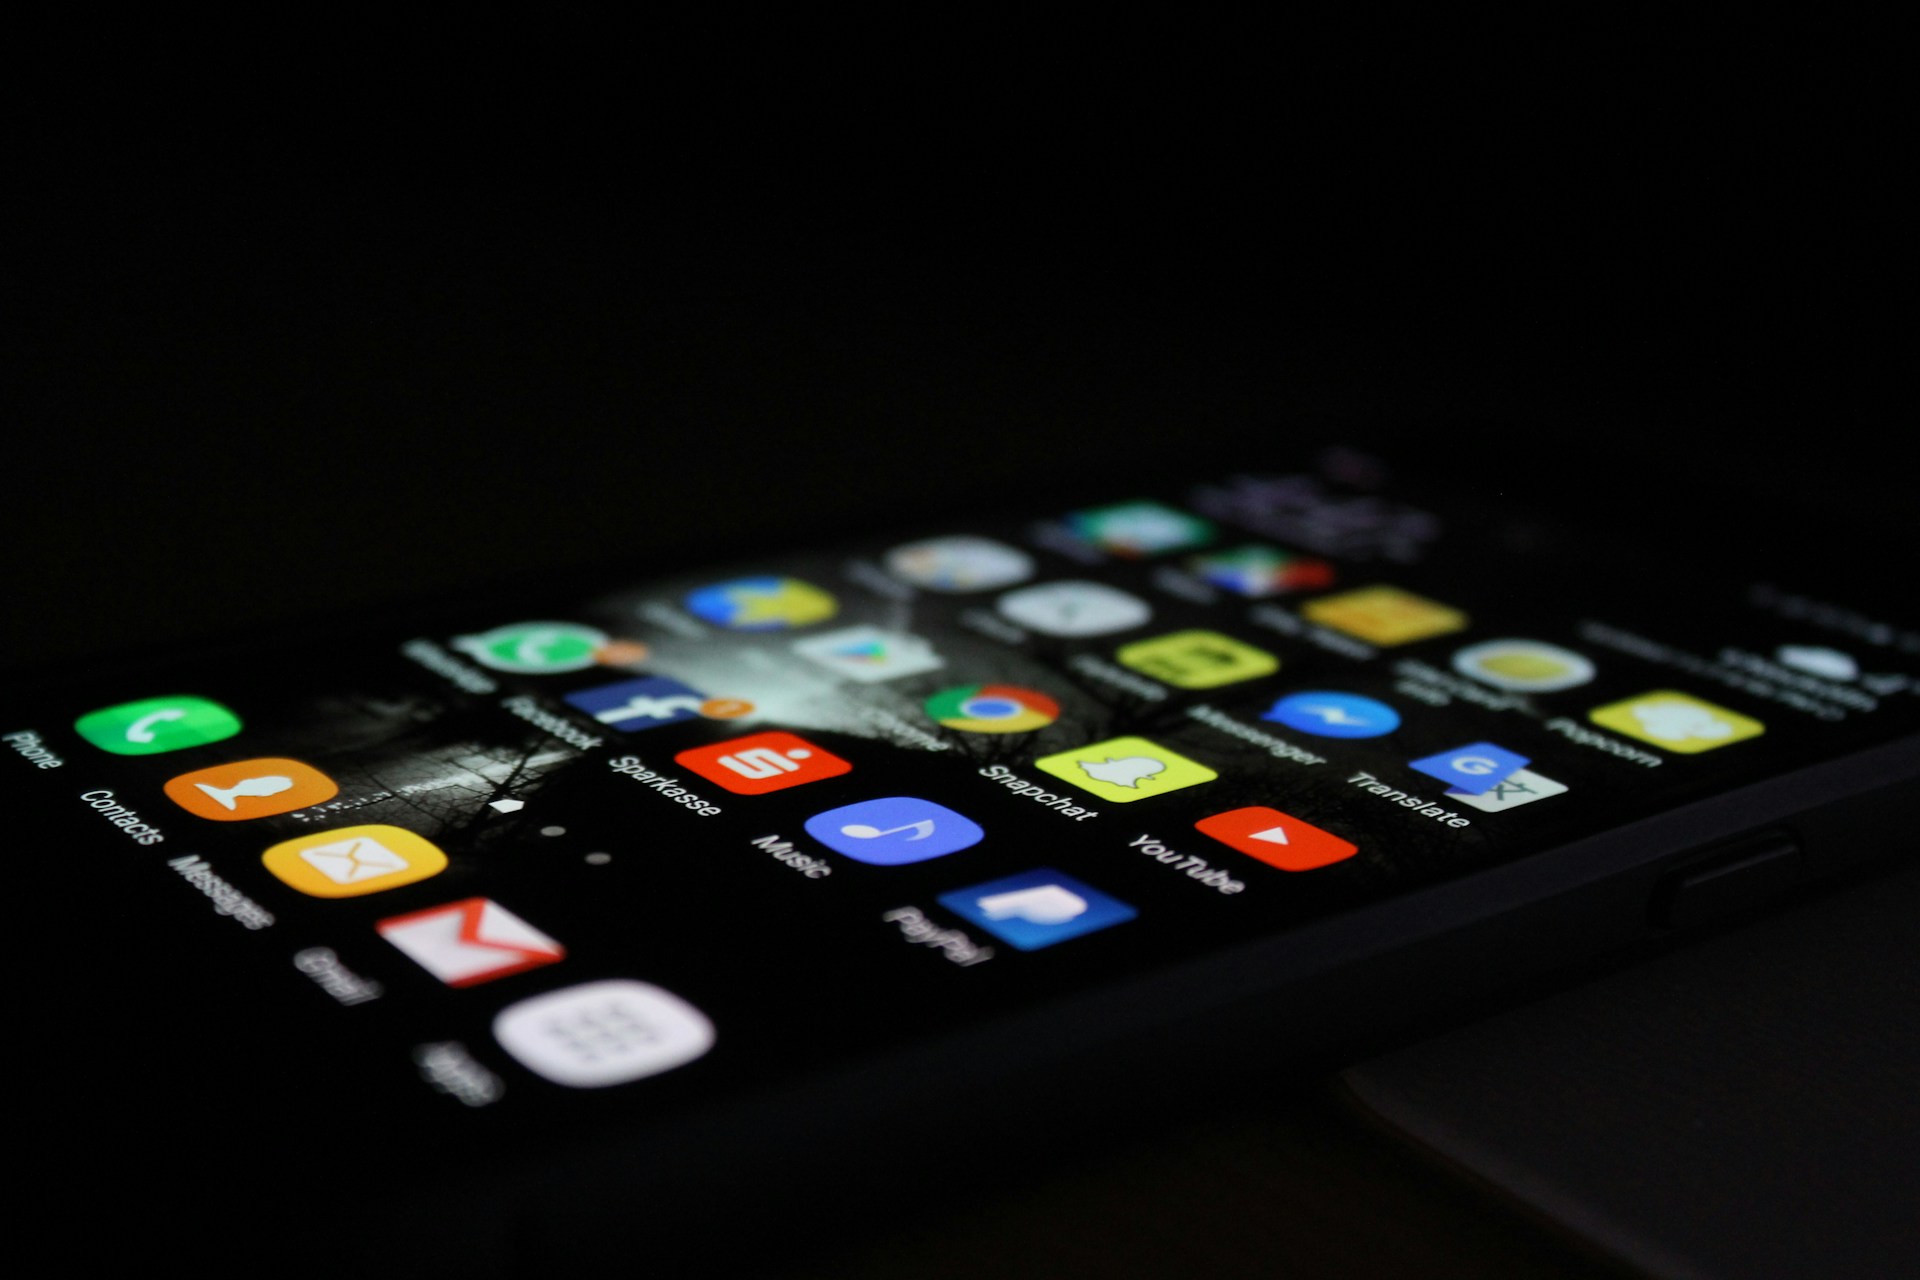 How to choose between the different types of Power Apps